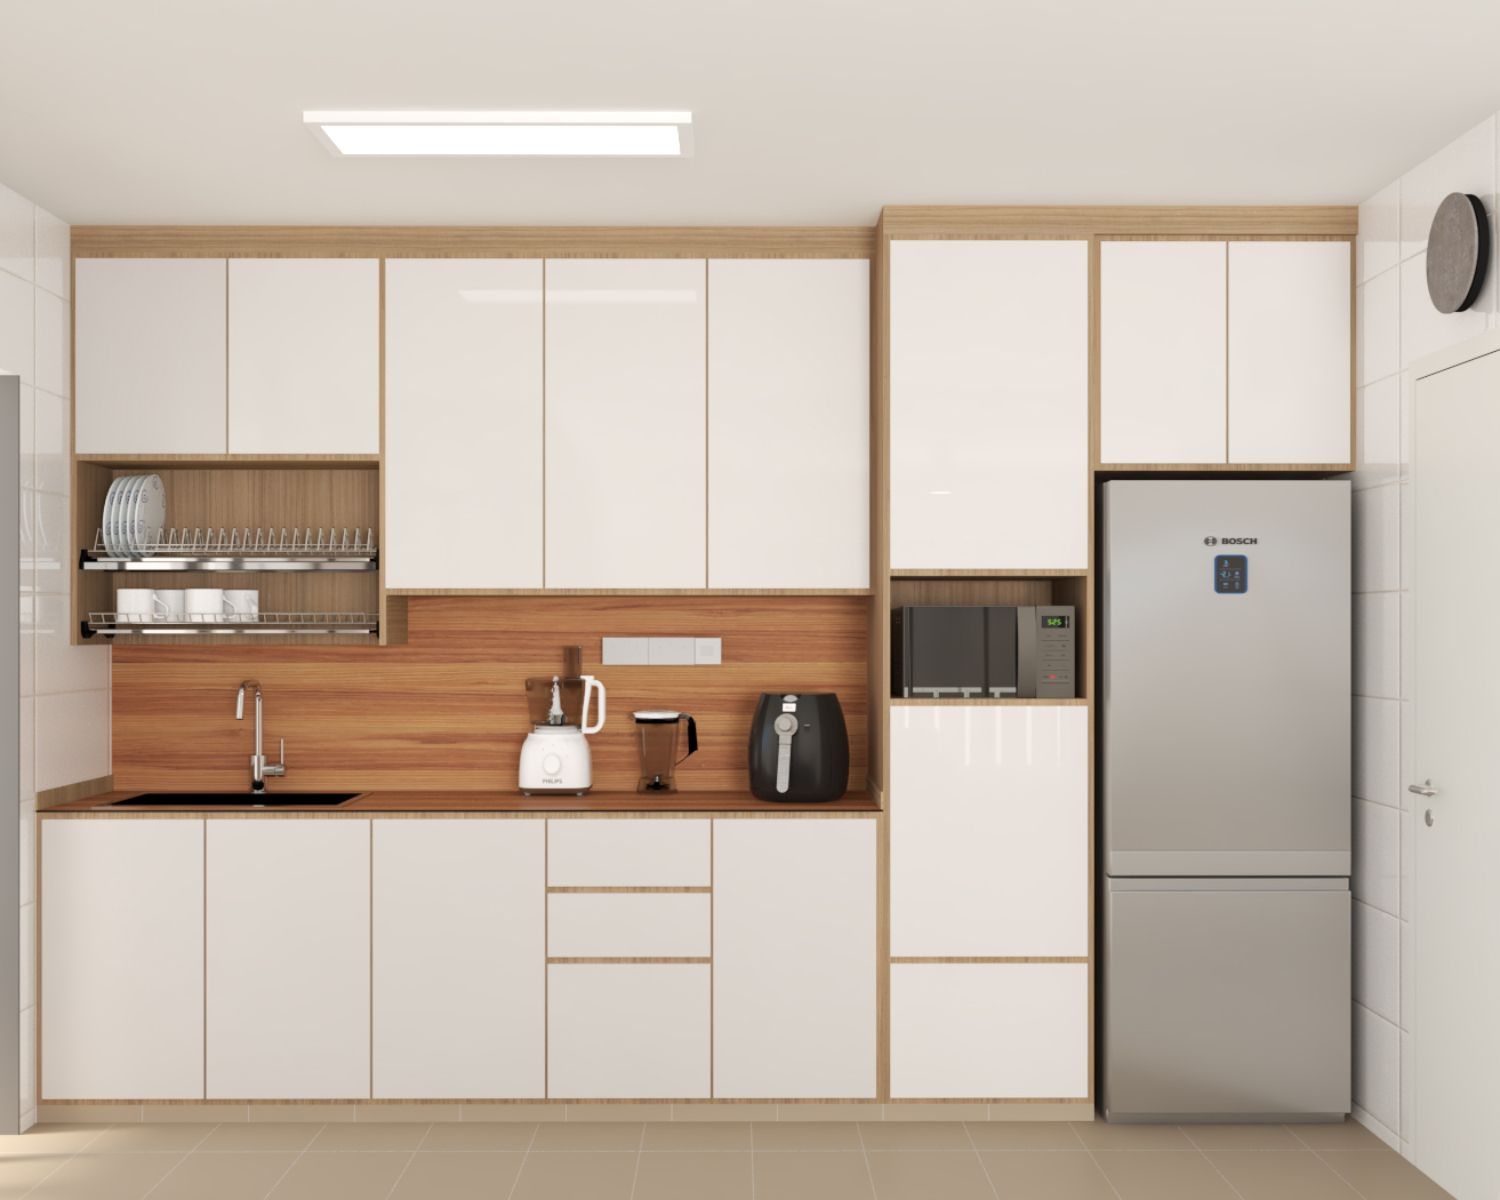 Contemporary Kitchen Design With White Closed Storage Cabinets